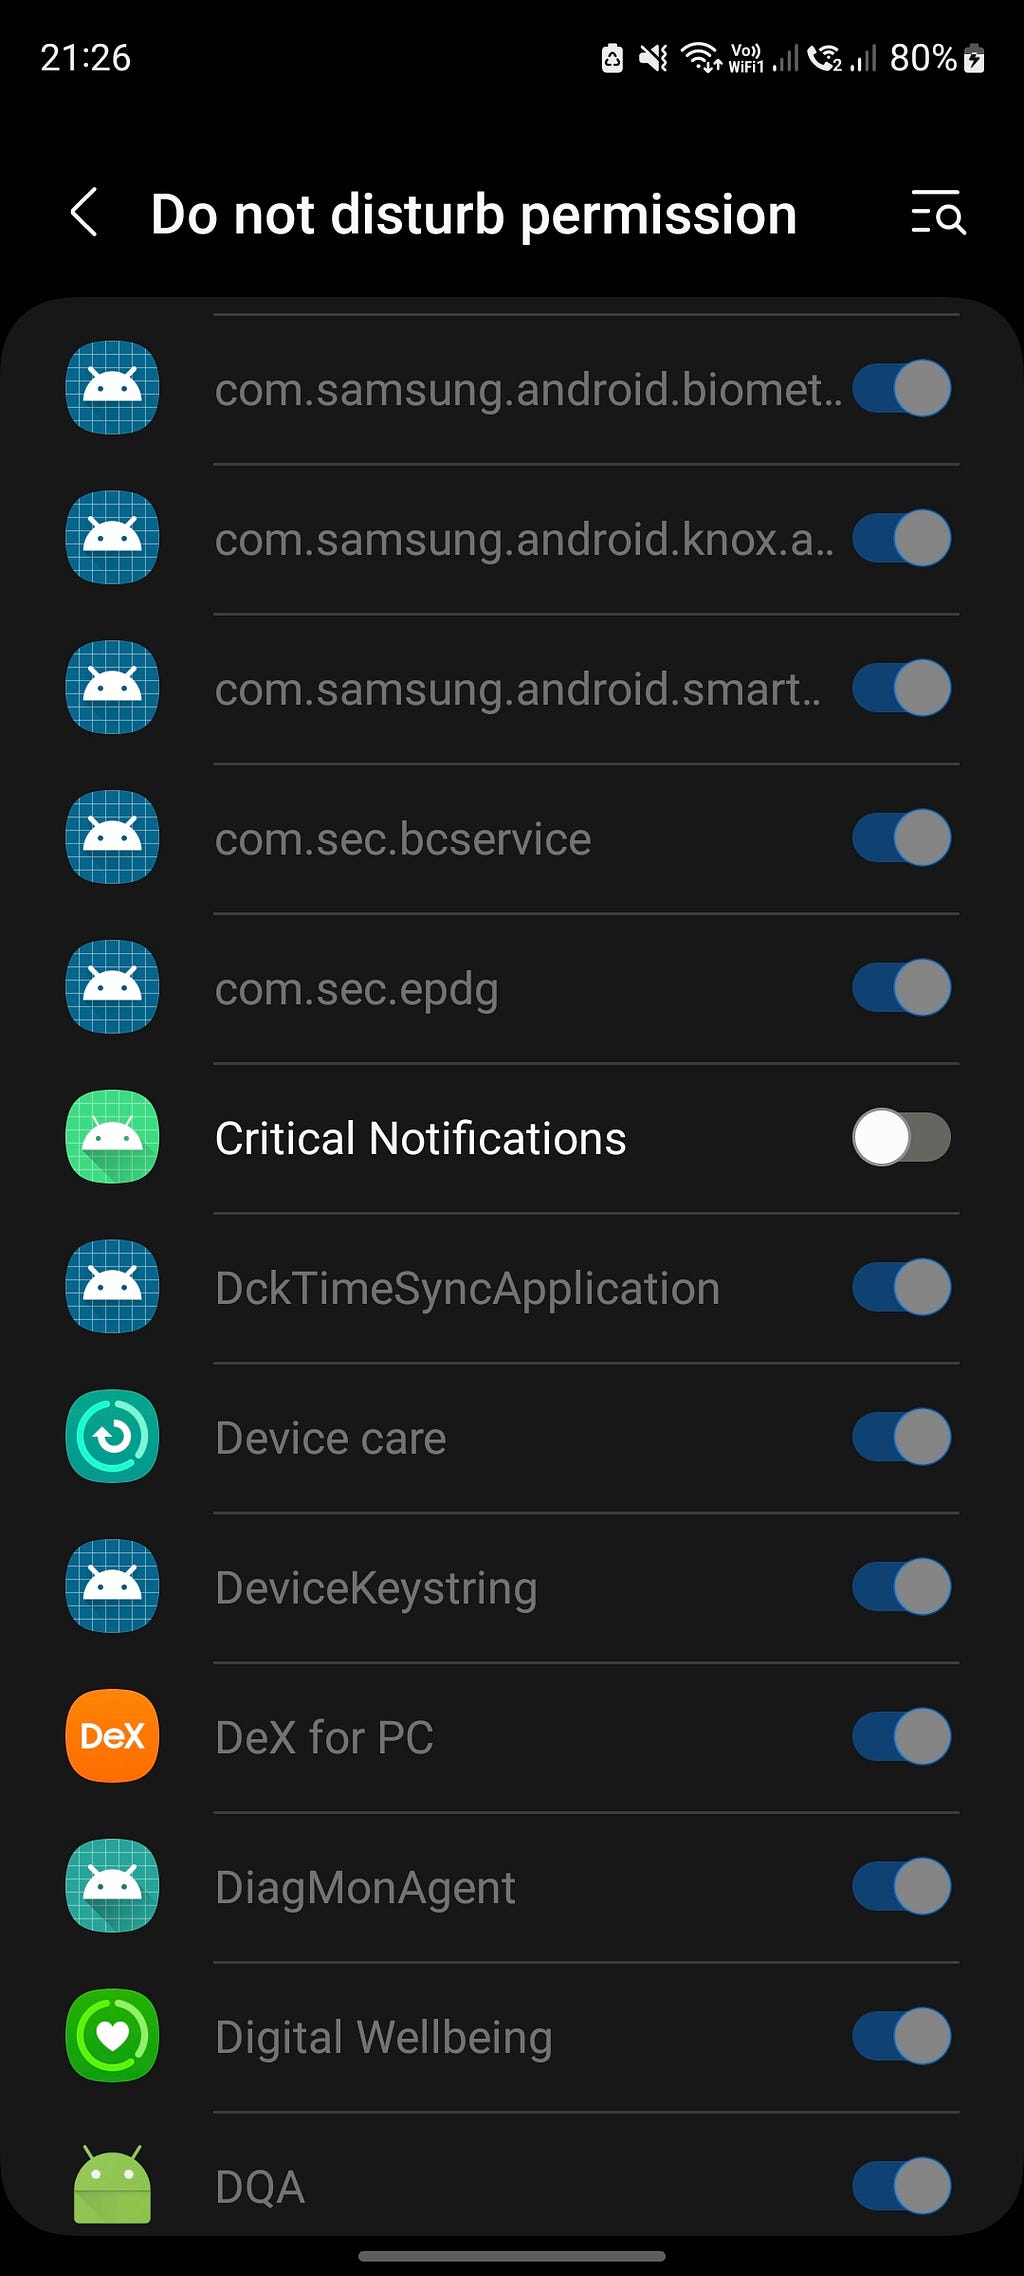 System settings screen which shows list of apps that requested Do not distrurb permission.